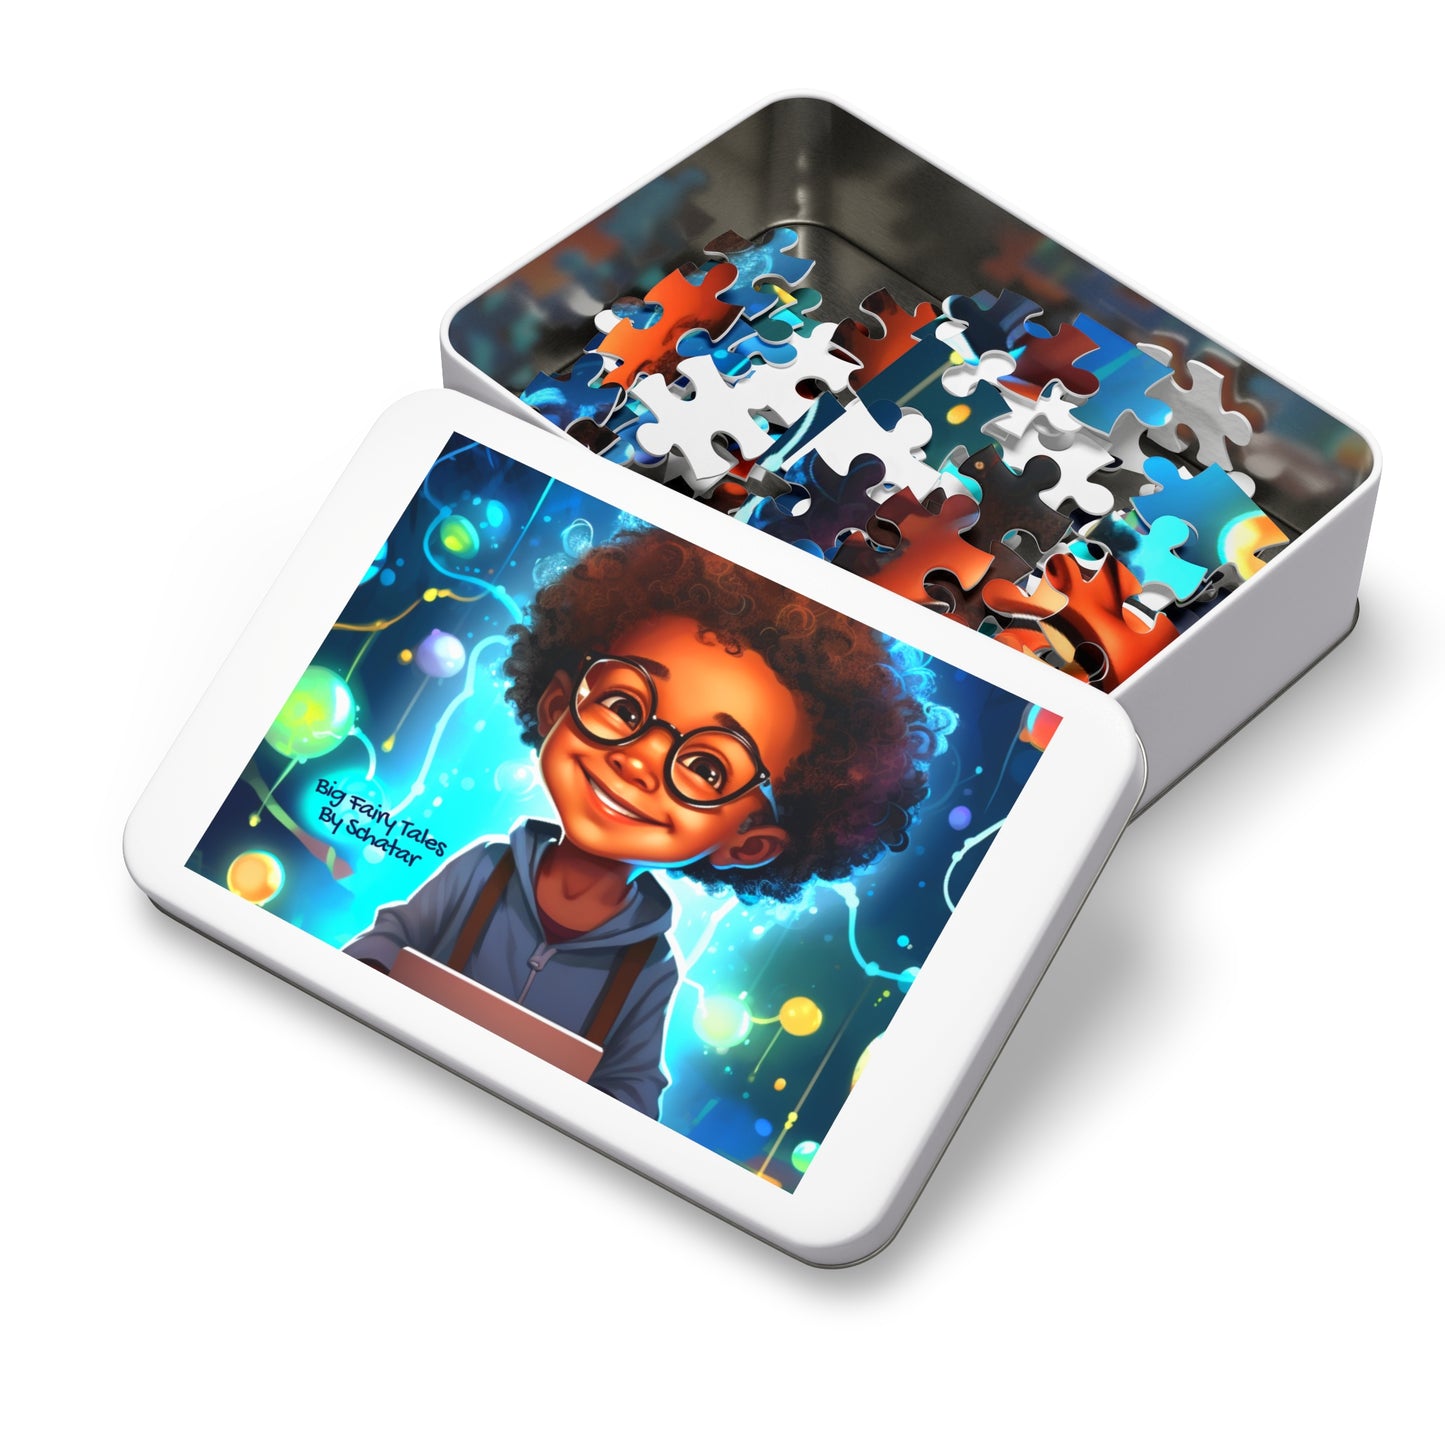 Computer Scientist - Big Little Professionals Puzzle 2 From Big Fairy Tales By Schatar